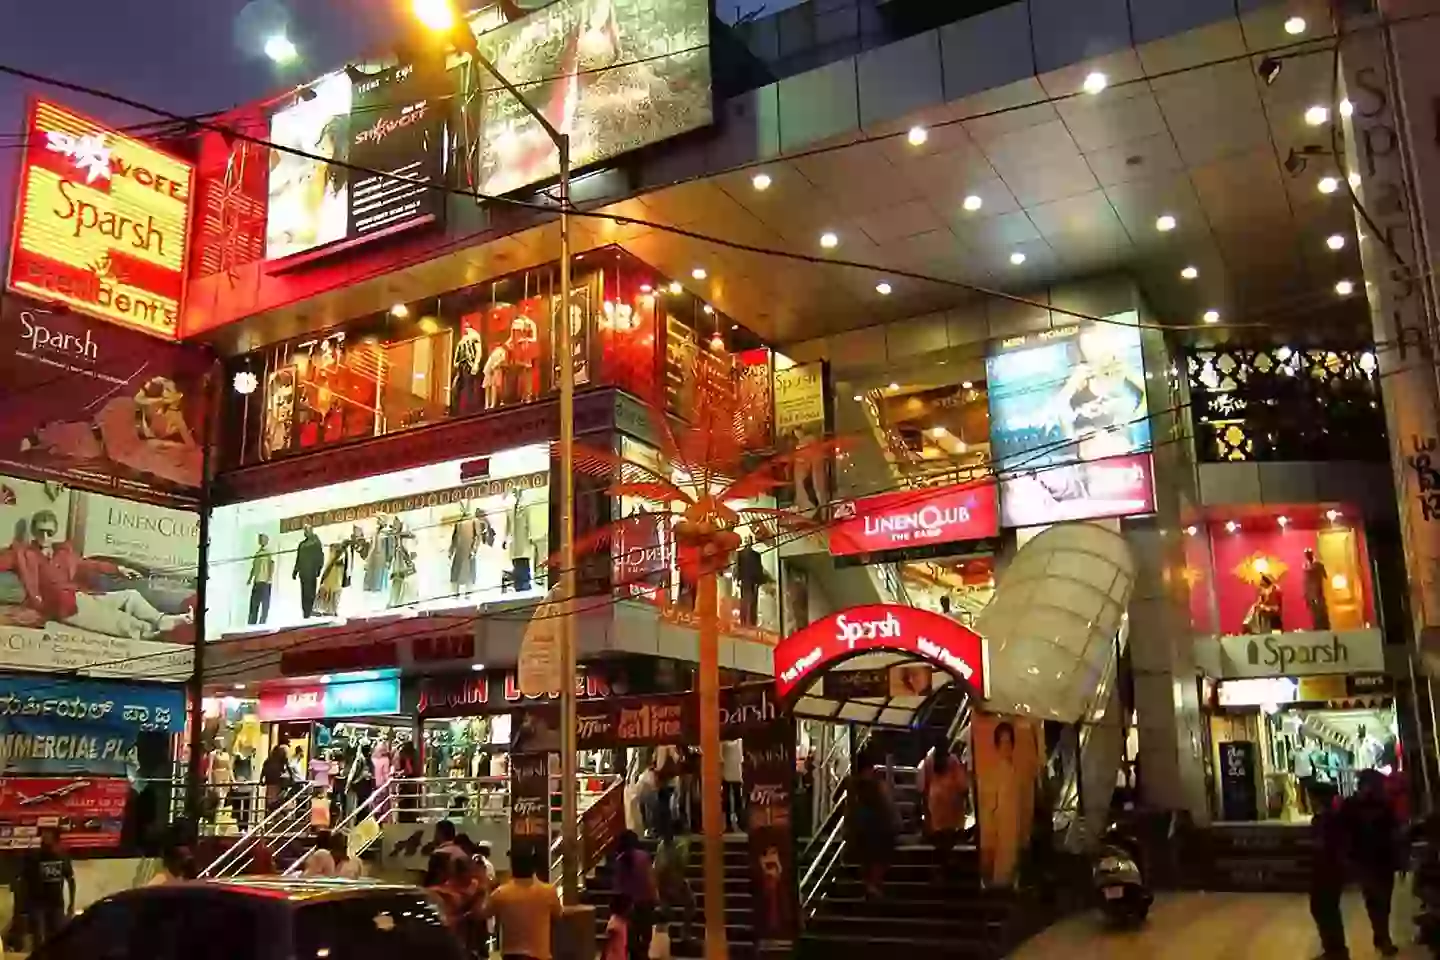 Commercial Street at night